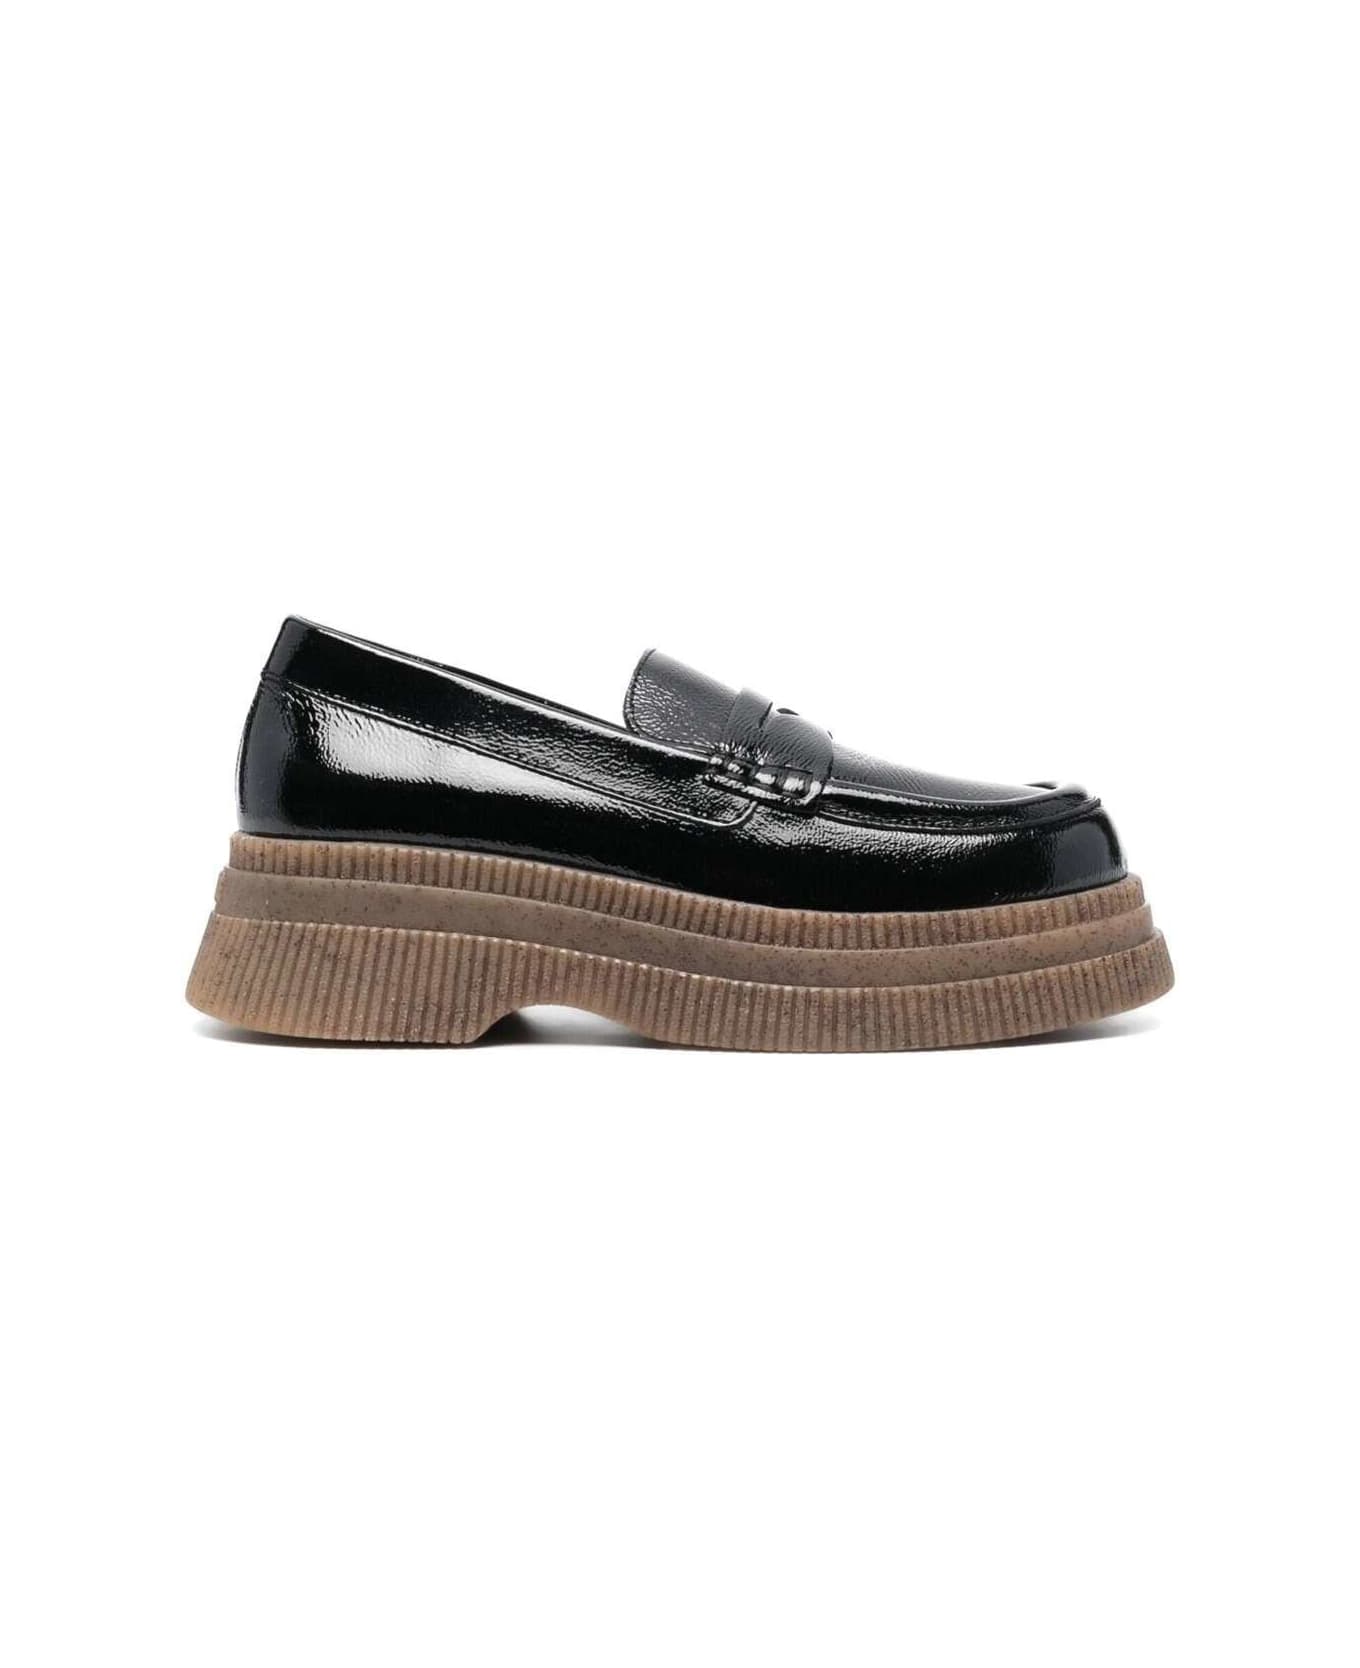 Ganni Creepers Wallaby Loafer - Black